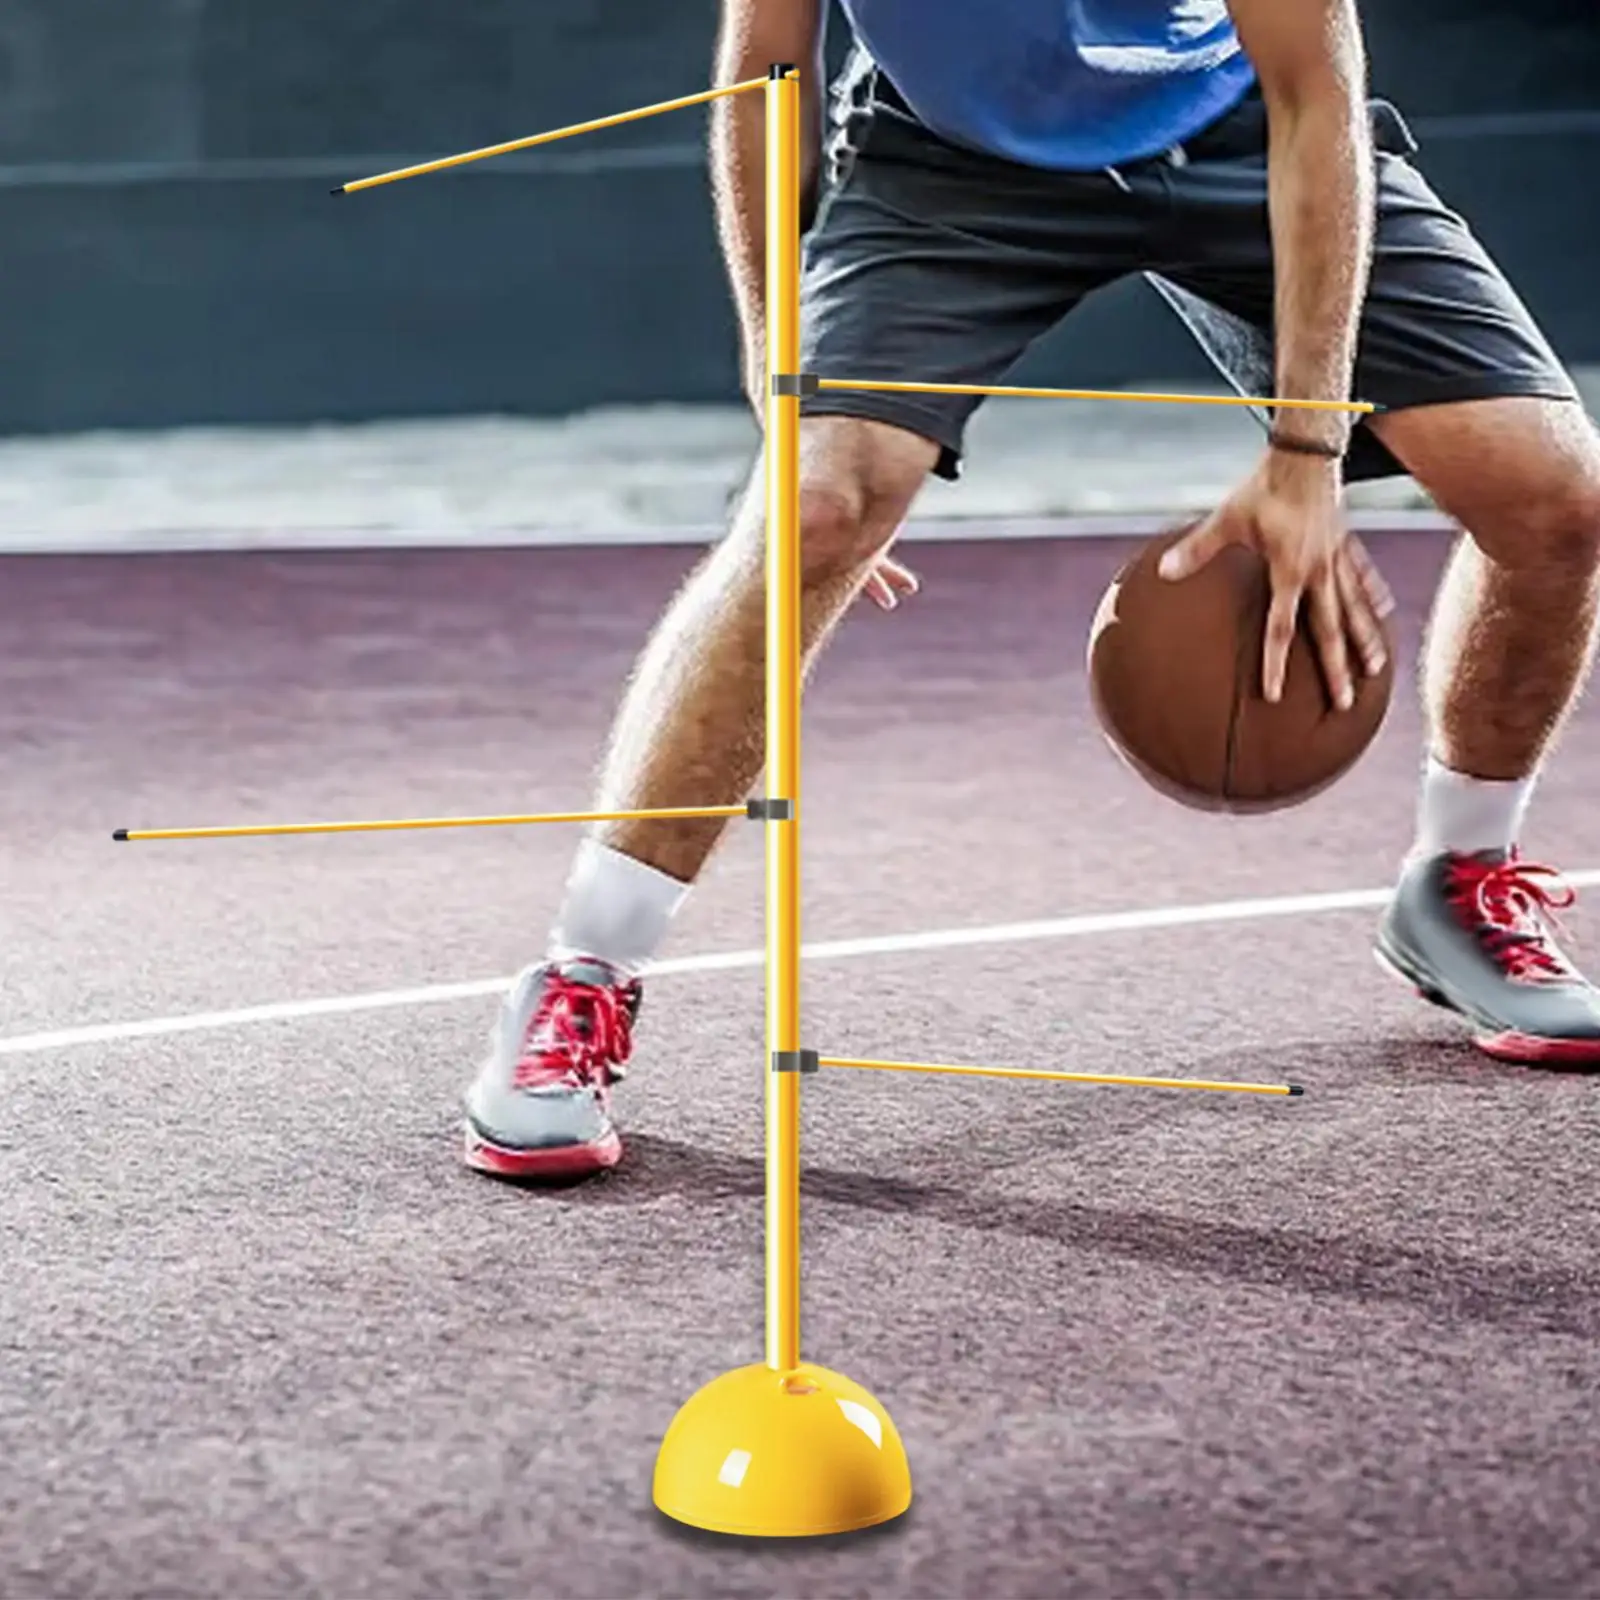 Basketball Fitness Training Sticks Agility Pole Improve Balance Quickness Sports Dribble Training for Gyms Outdoor Activity